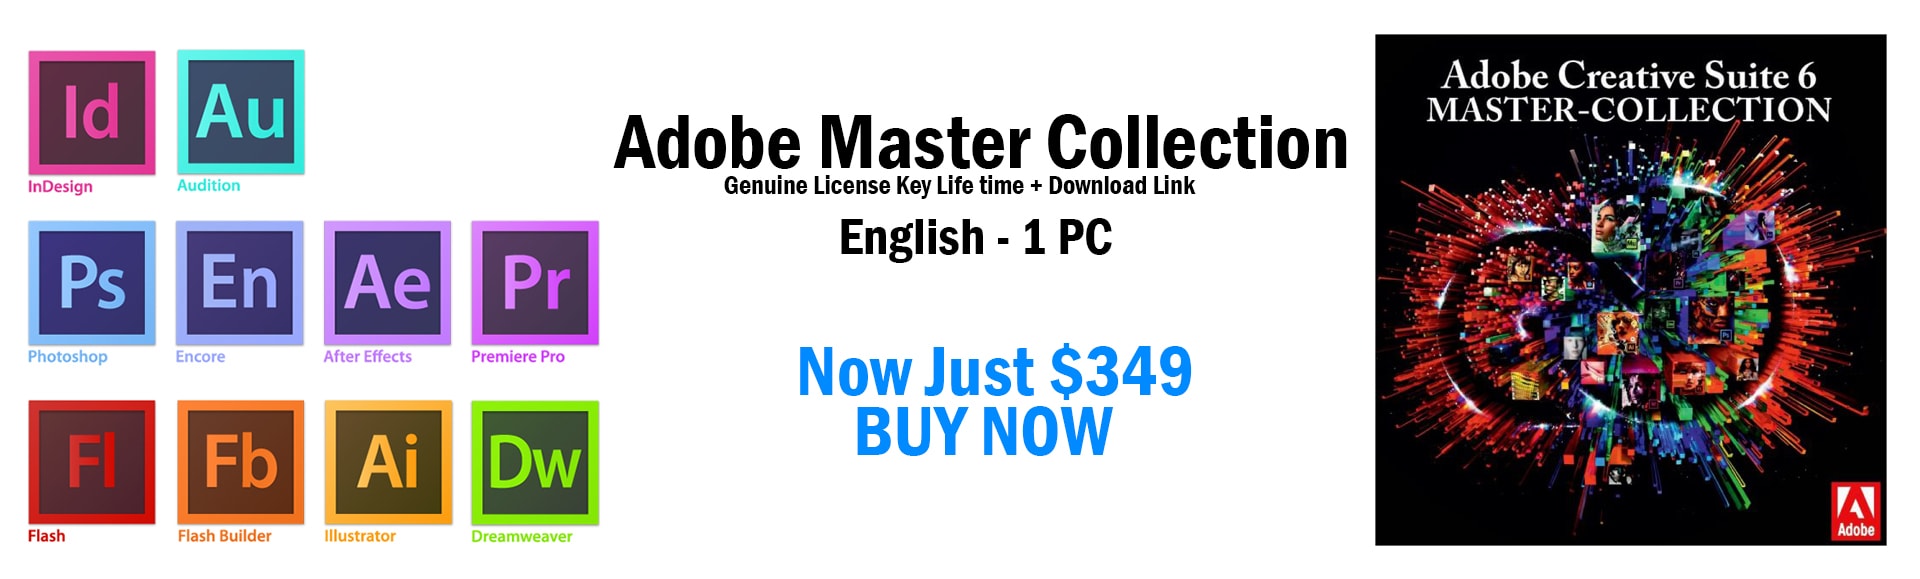 serial number adobe cs6 master collection free